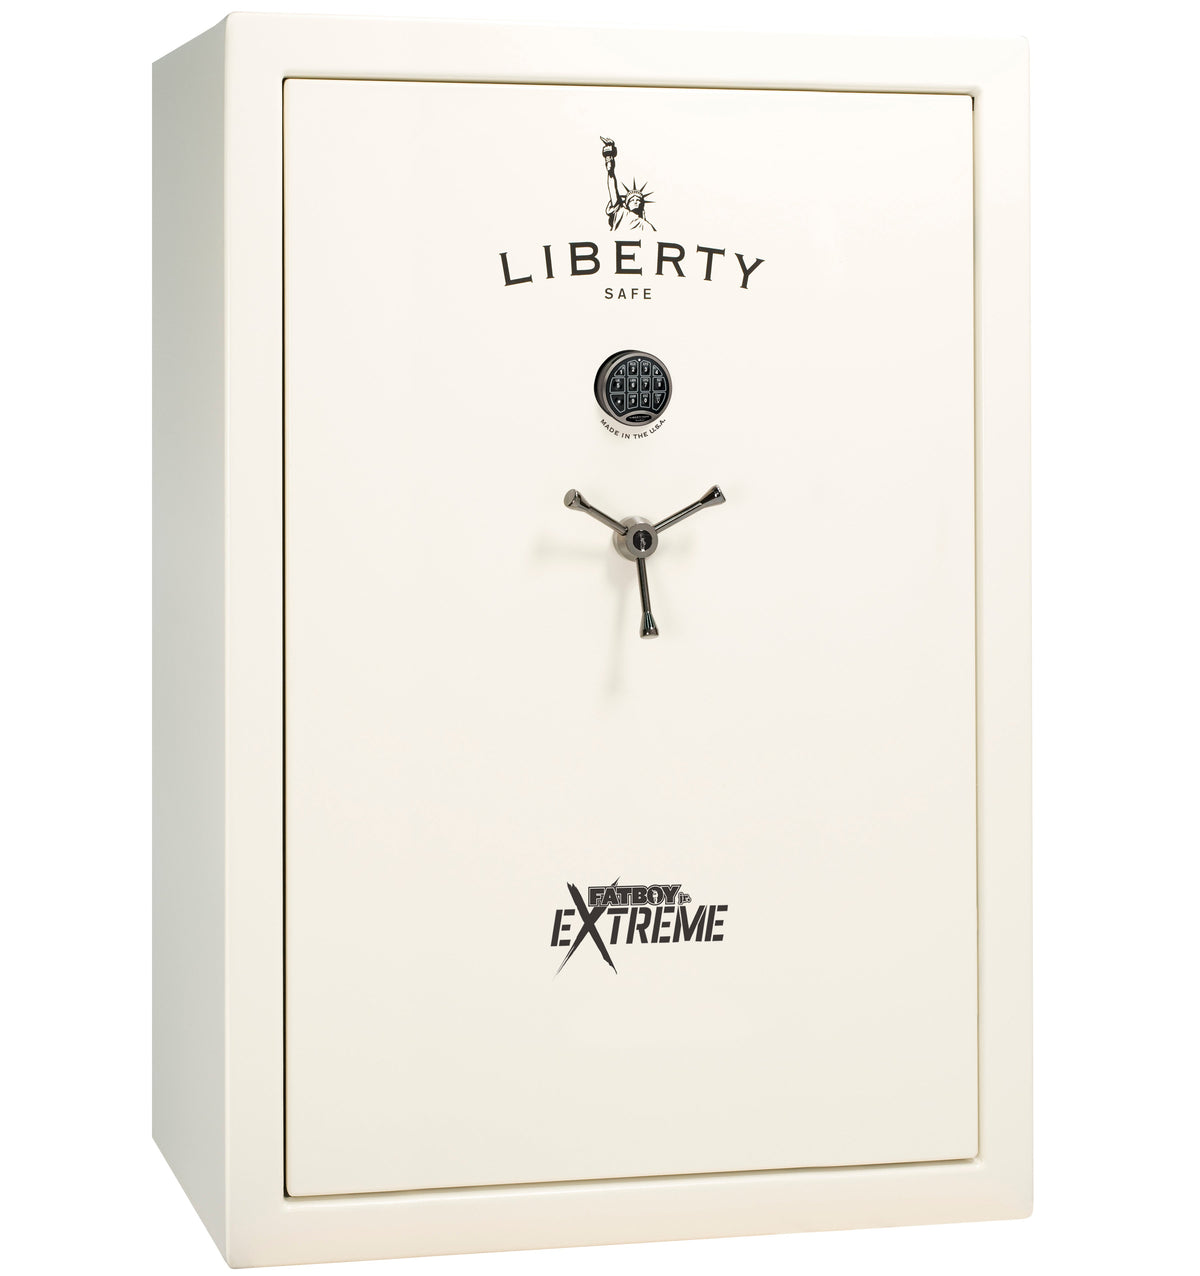 Fatboy Jr. Extreme - Textured White Elock | Level 4 Security | 75 Minute Fire Protection |